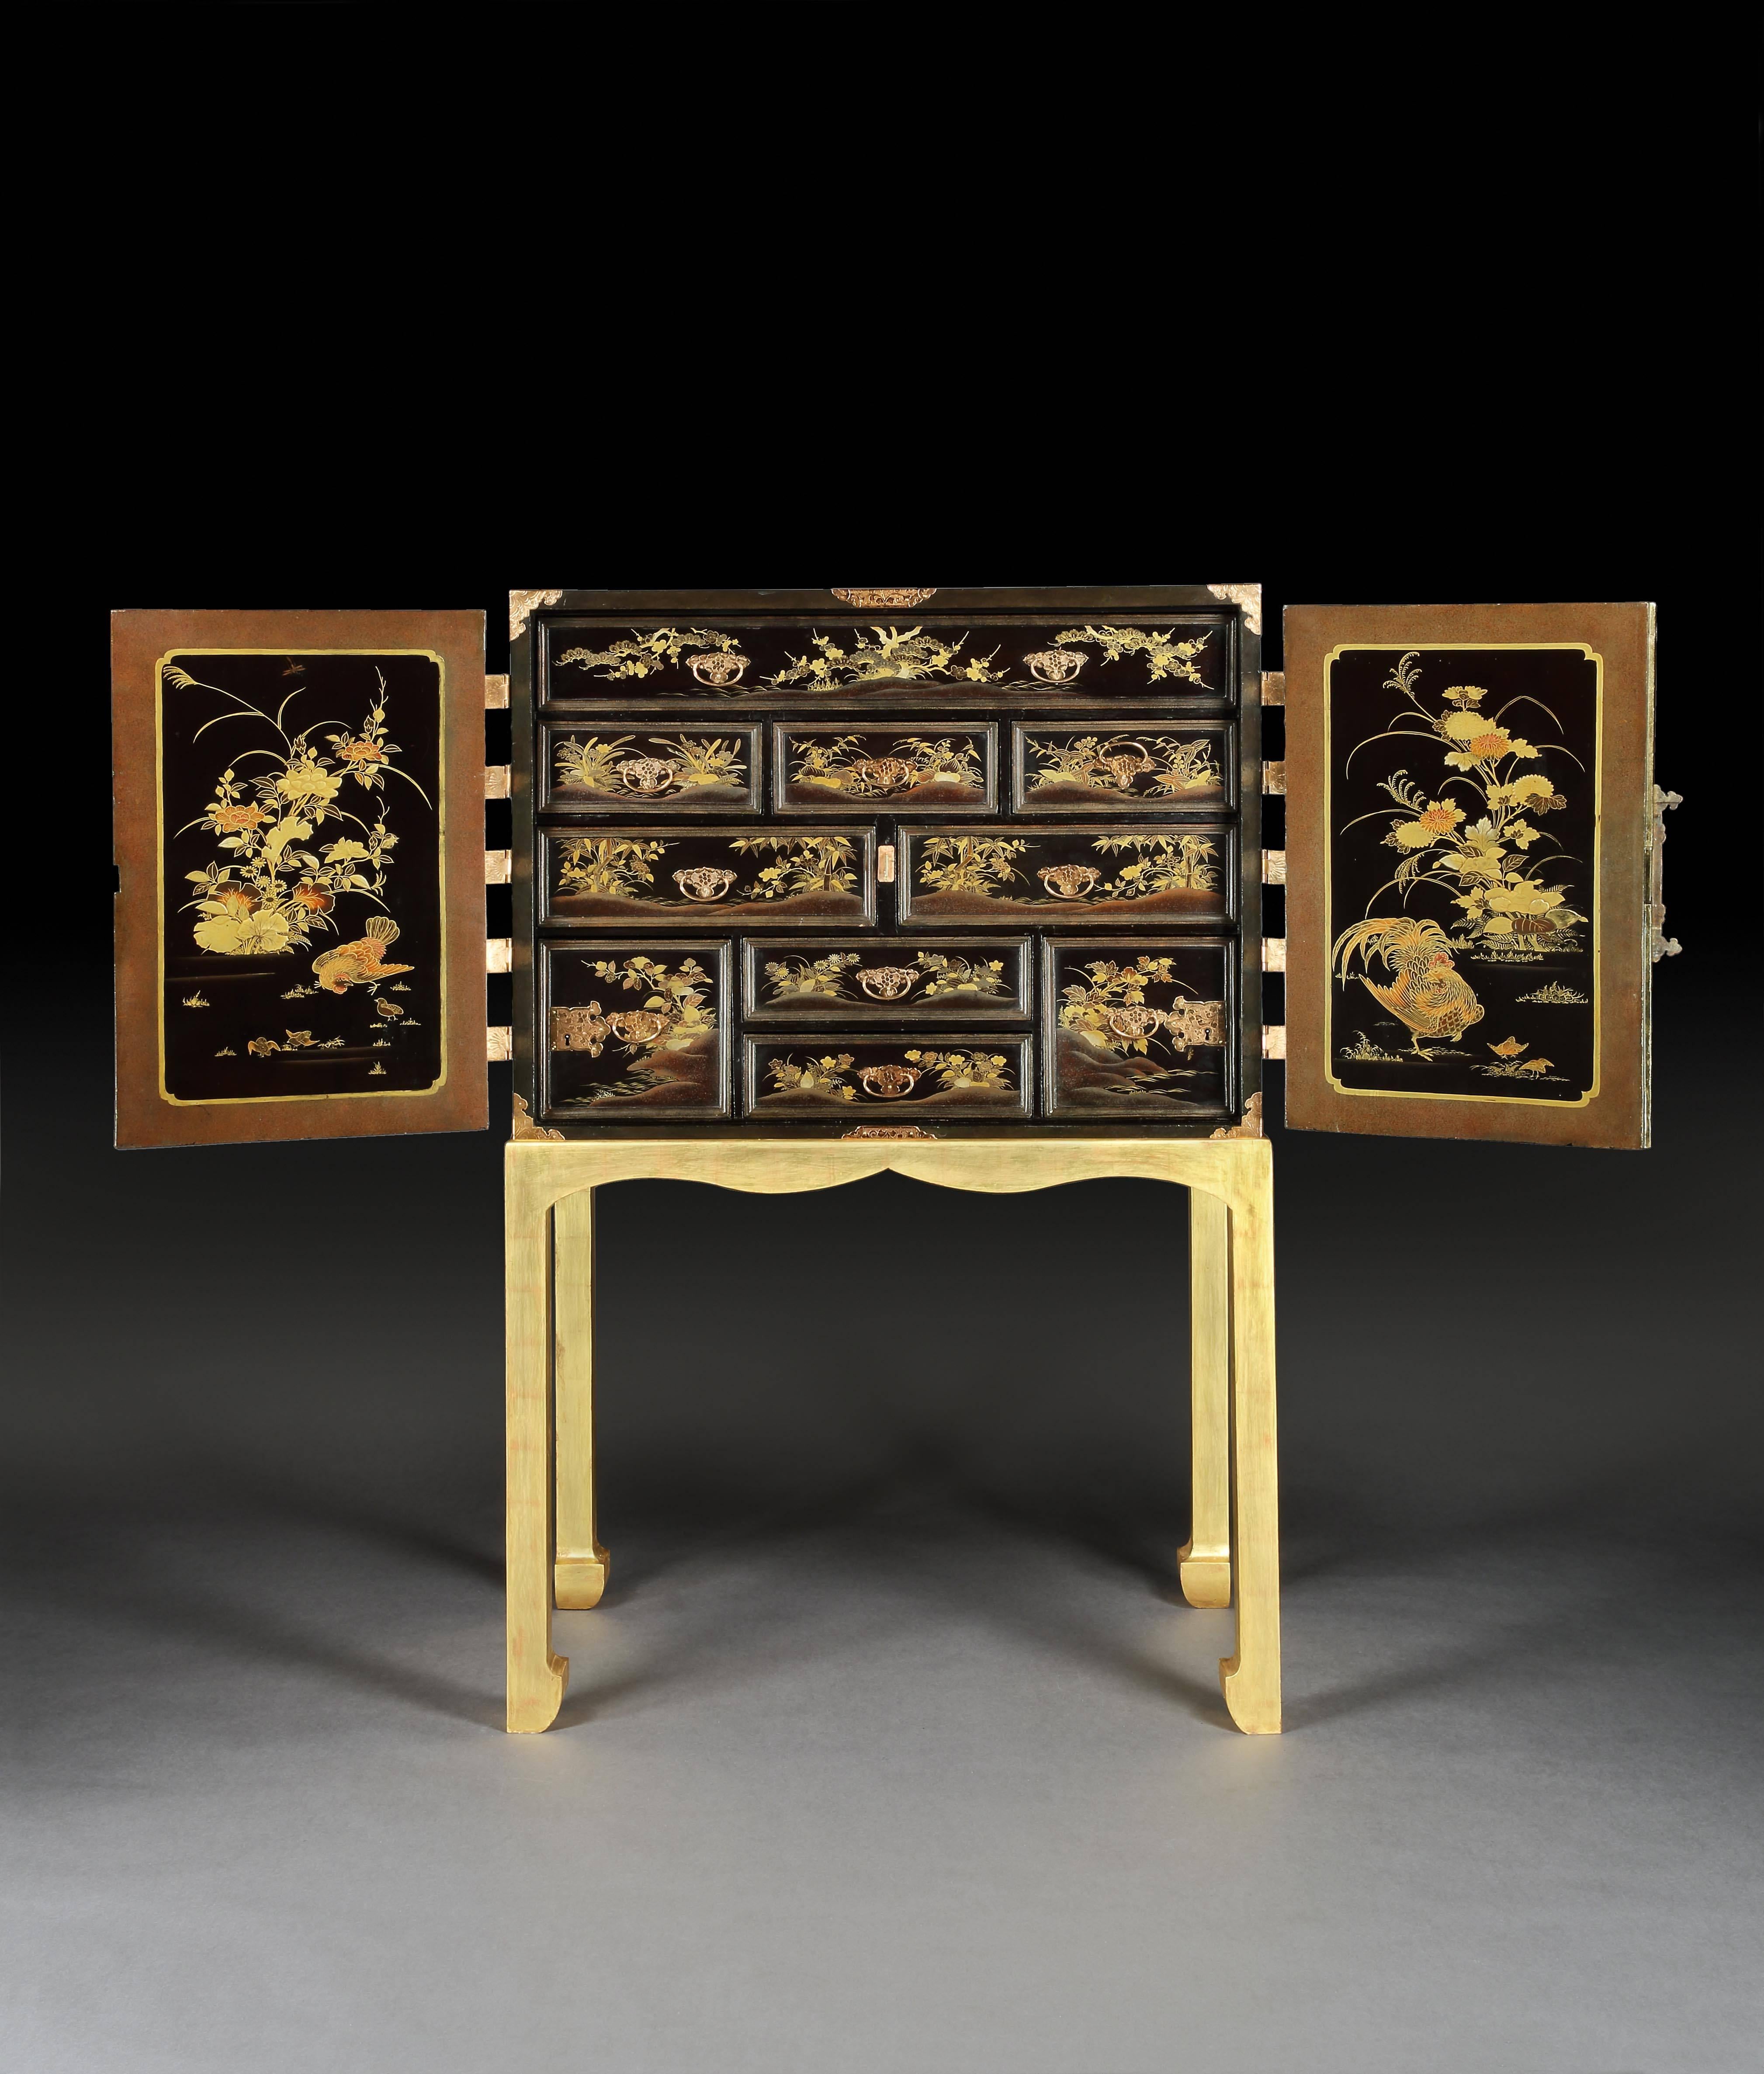 An exceptional Japanese Edo period black and gilt lacquer cabinet decorated throughout, including the top, with mountain landscape scenes, with a pair of doors with copper engraved mounts, hinges and lock-plates opening to reveal ten drawers of